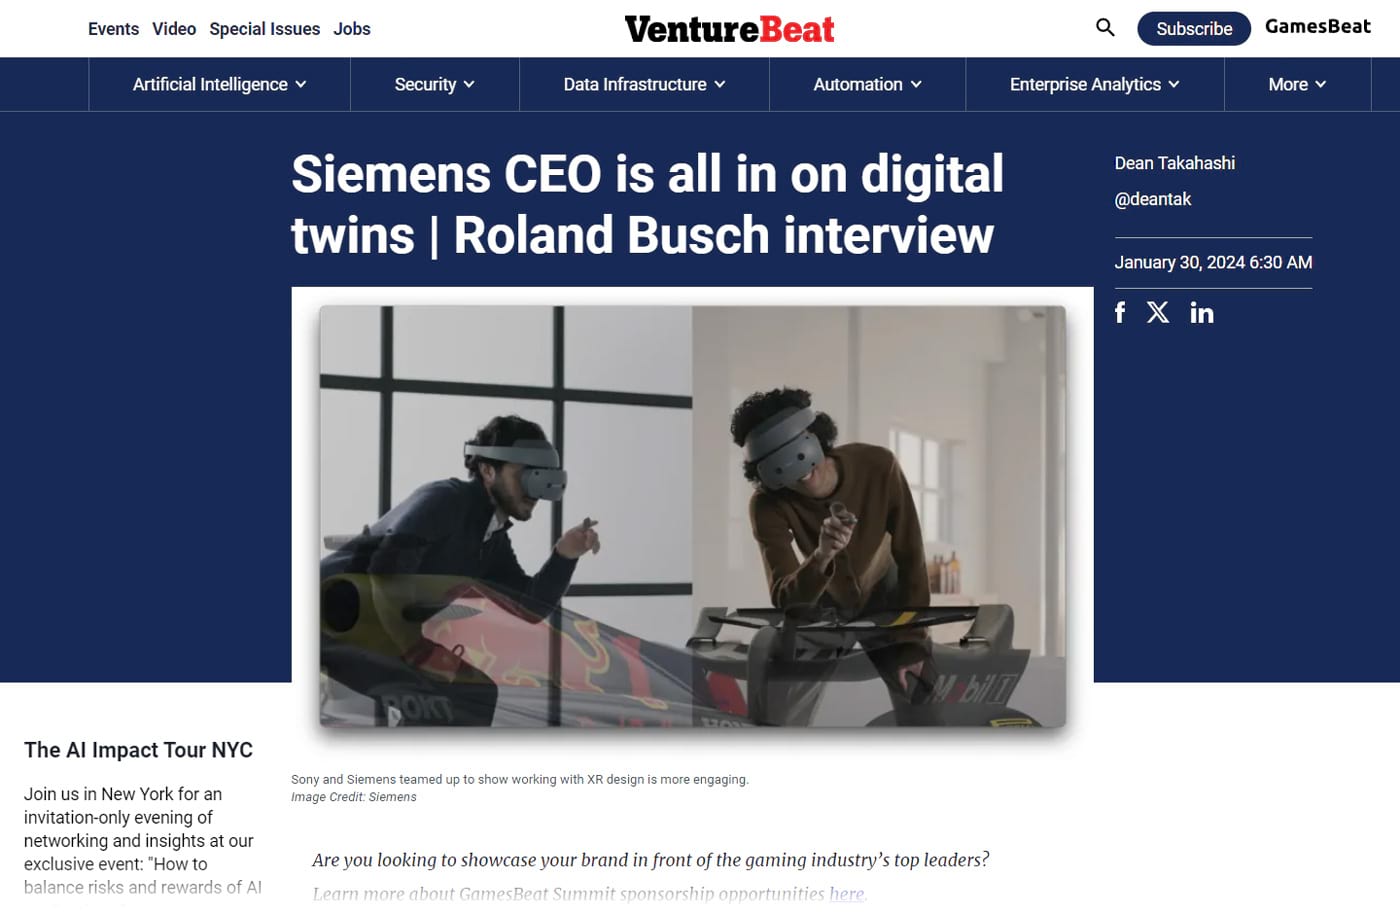 Venture Beat's article titled: "Siemens CEO is all in on digital twins | Roland Busch interview"